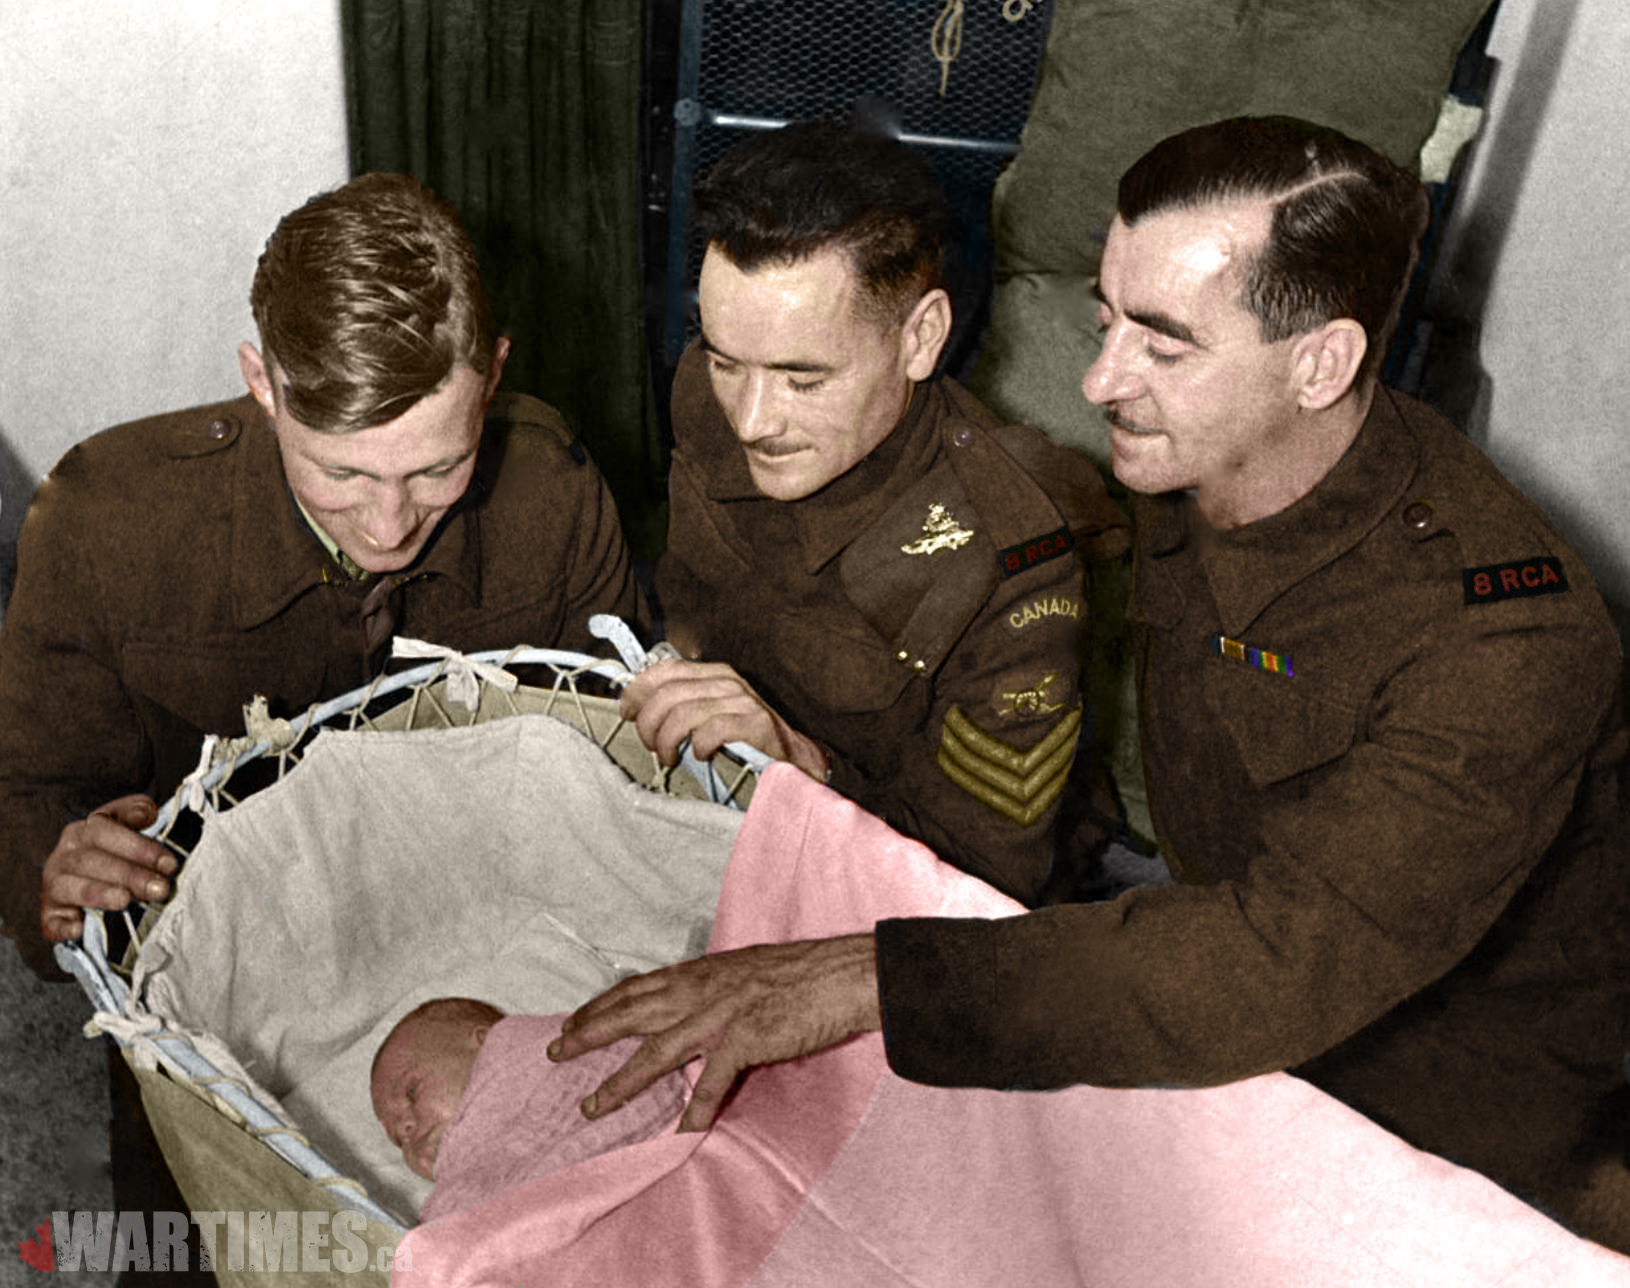 Abandoned Baby Found by Canadian RCA Soldiers in Woking September 23 1941 Colourized.jpg